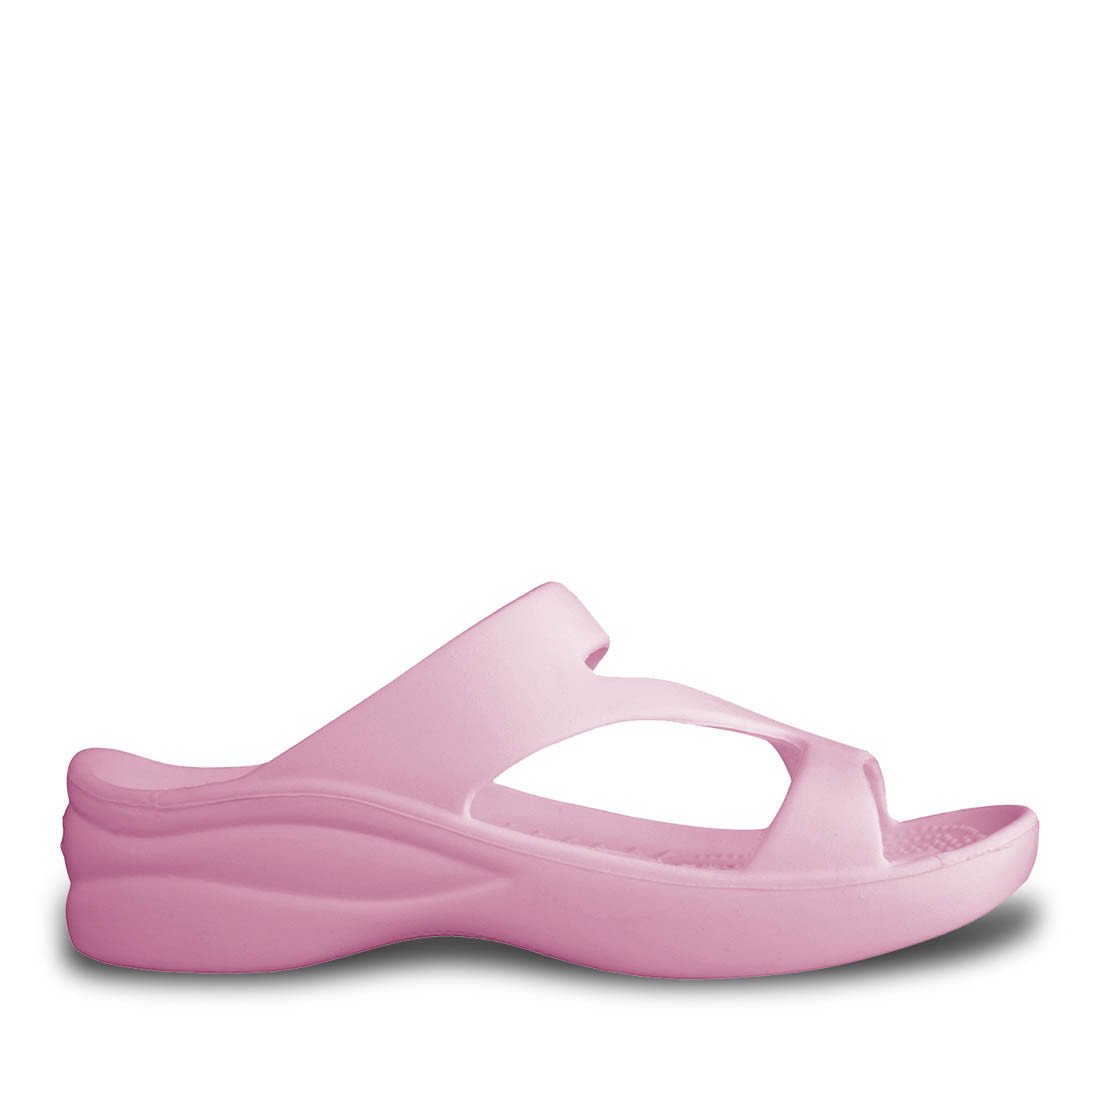 Toddler Girl's Z Sandals by DAWGS USA